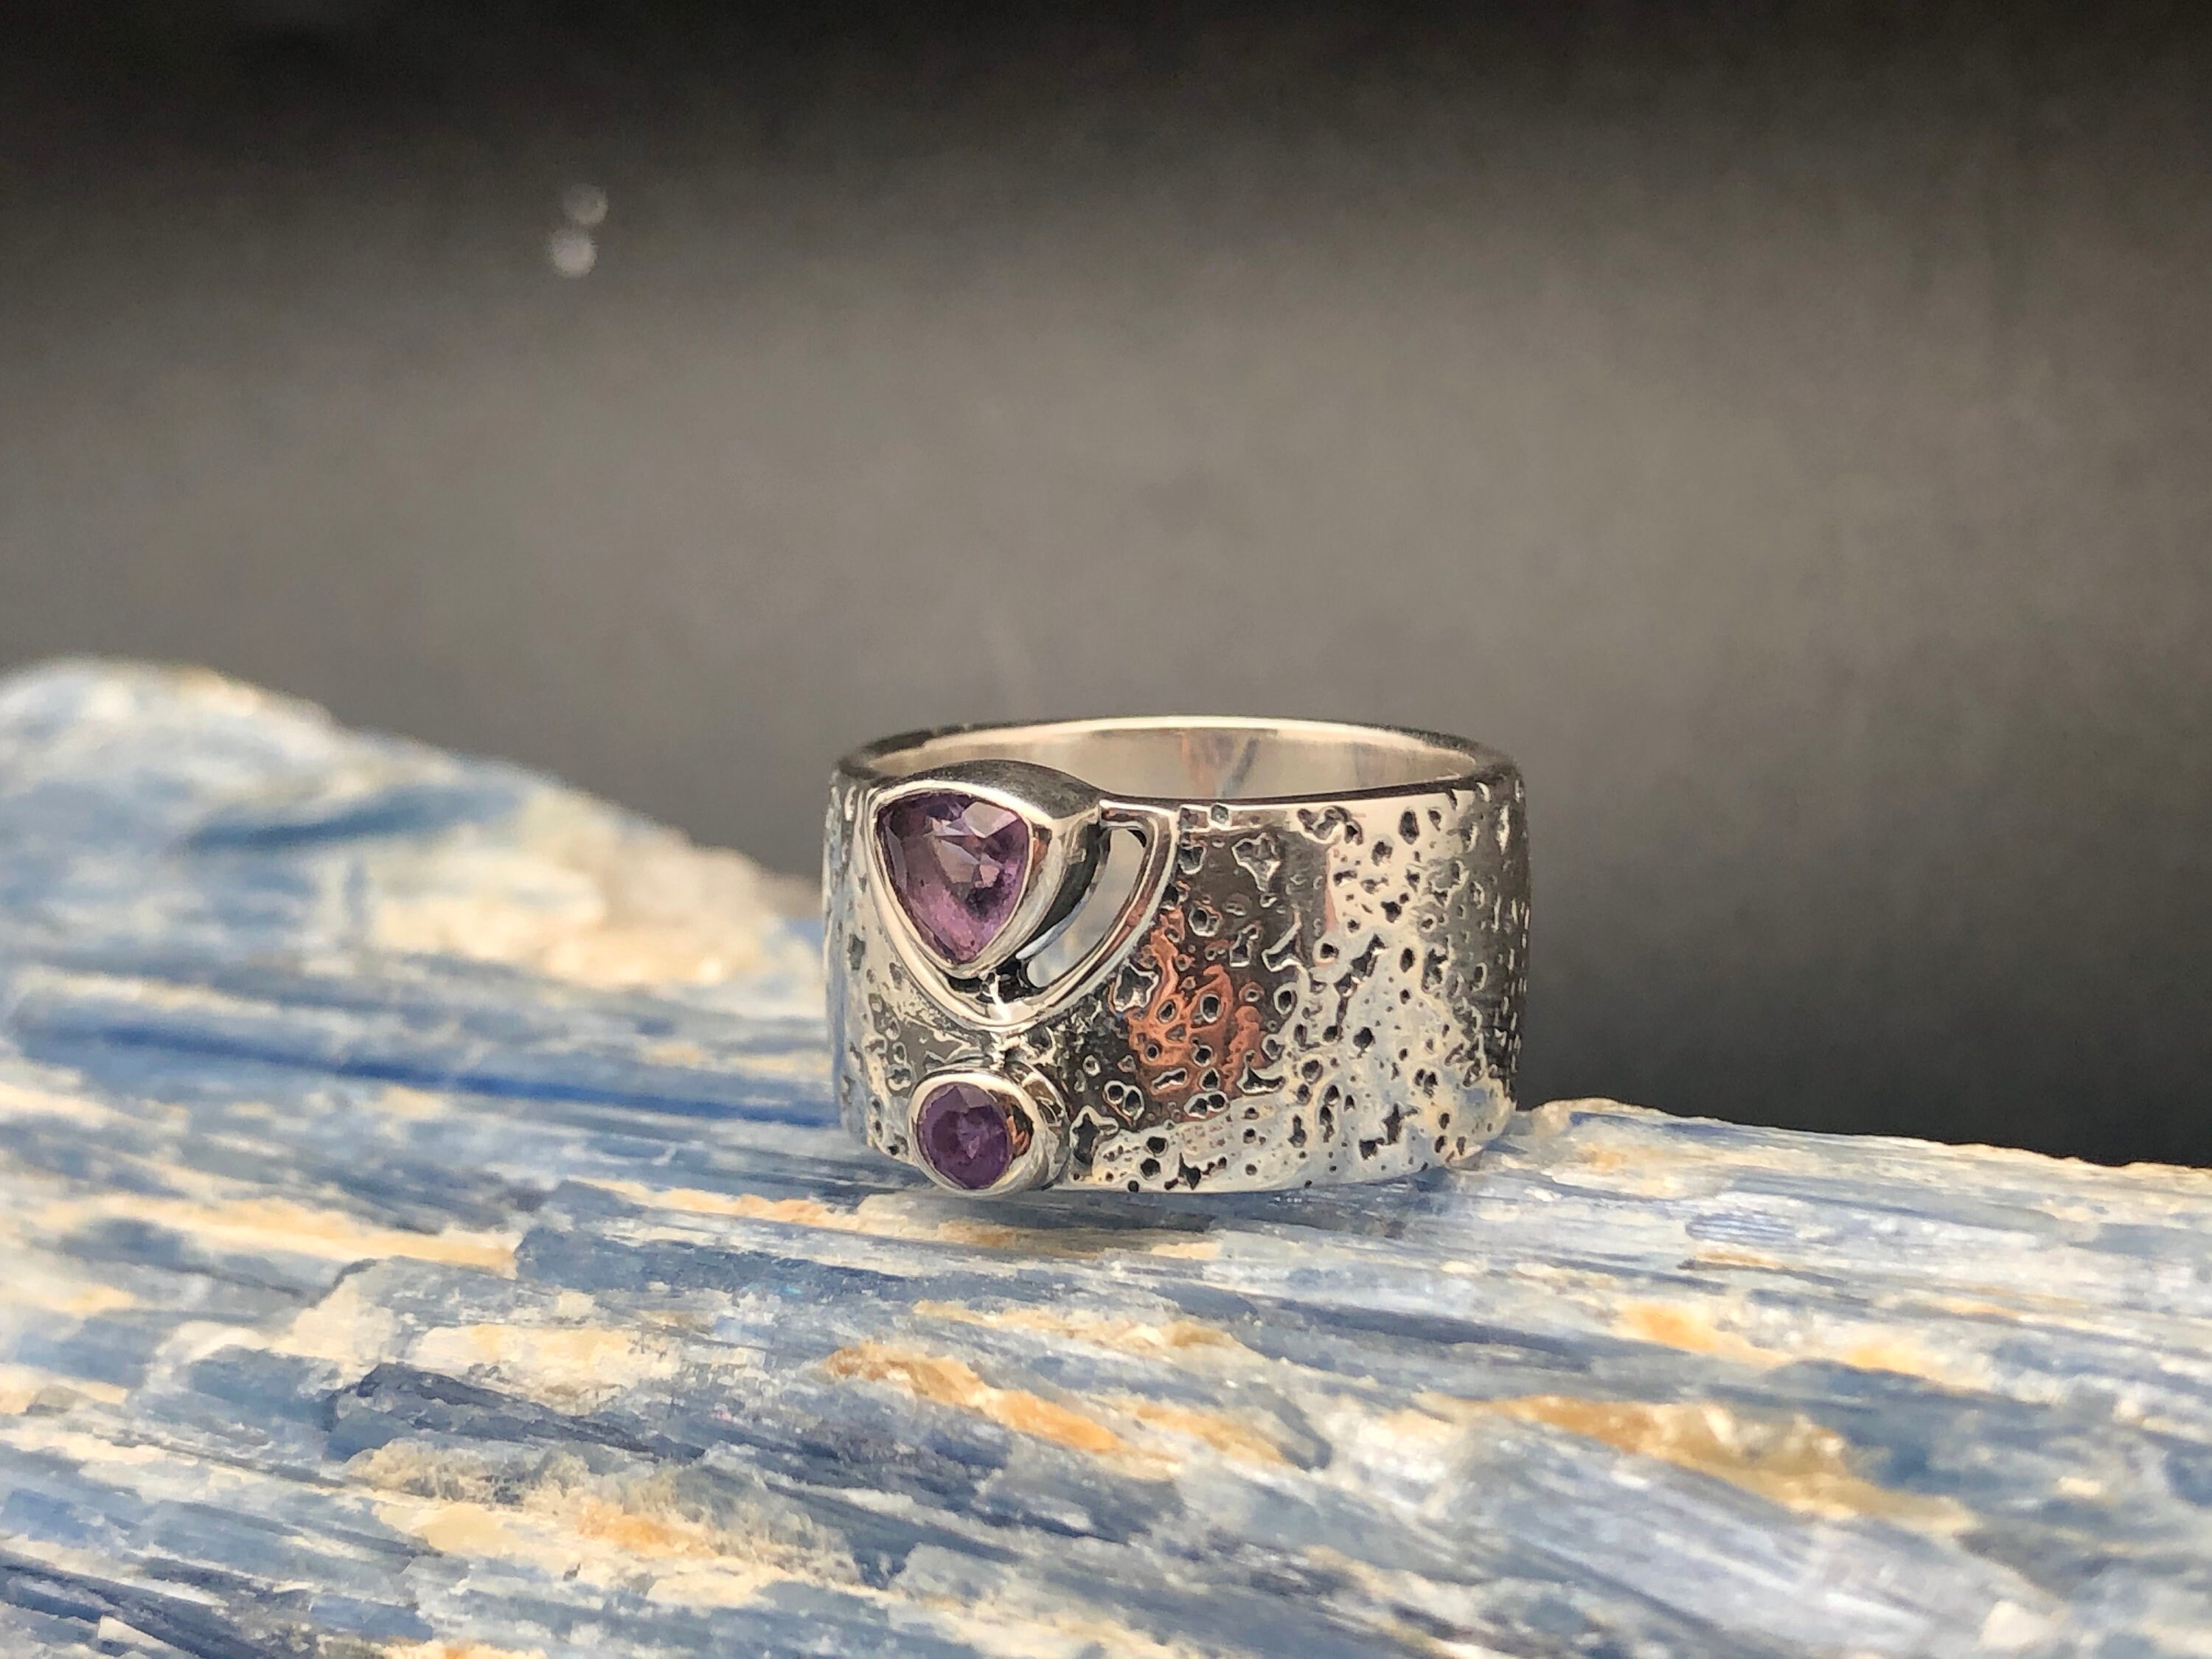 Textured Amethyst Band Ring // 925 Sterling Silver // Oxidized | Etsy